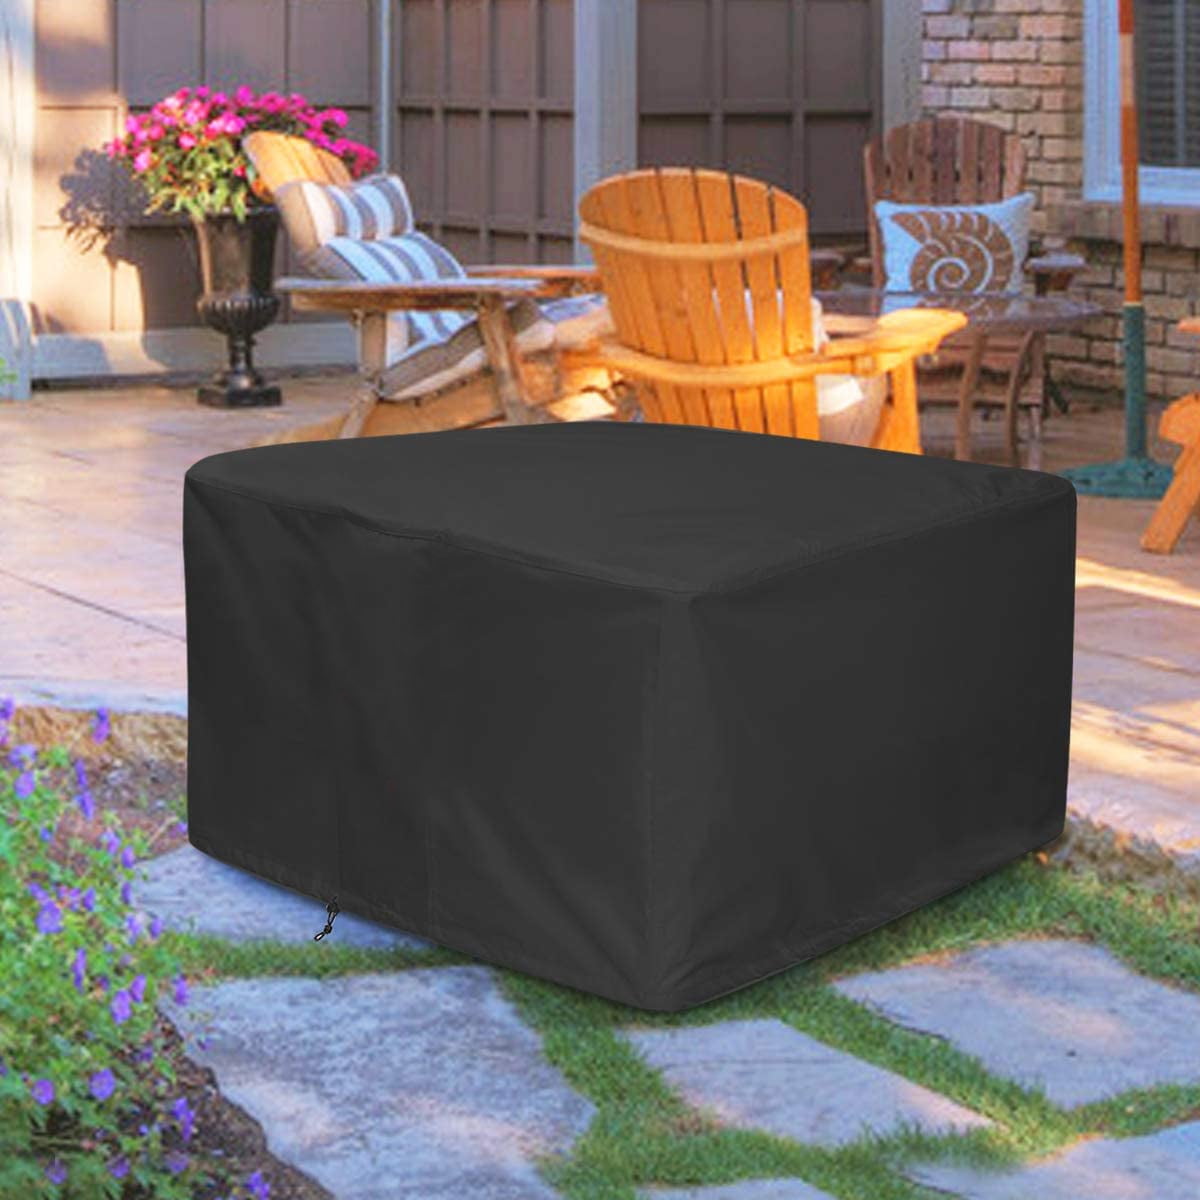 Waterproof Garden Patio Furniture Covers Square Outdoor Table Rain Cover New 47" 